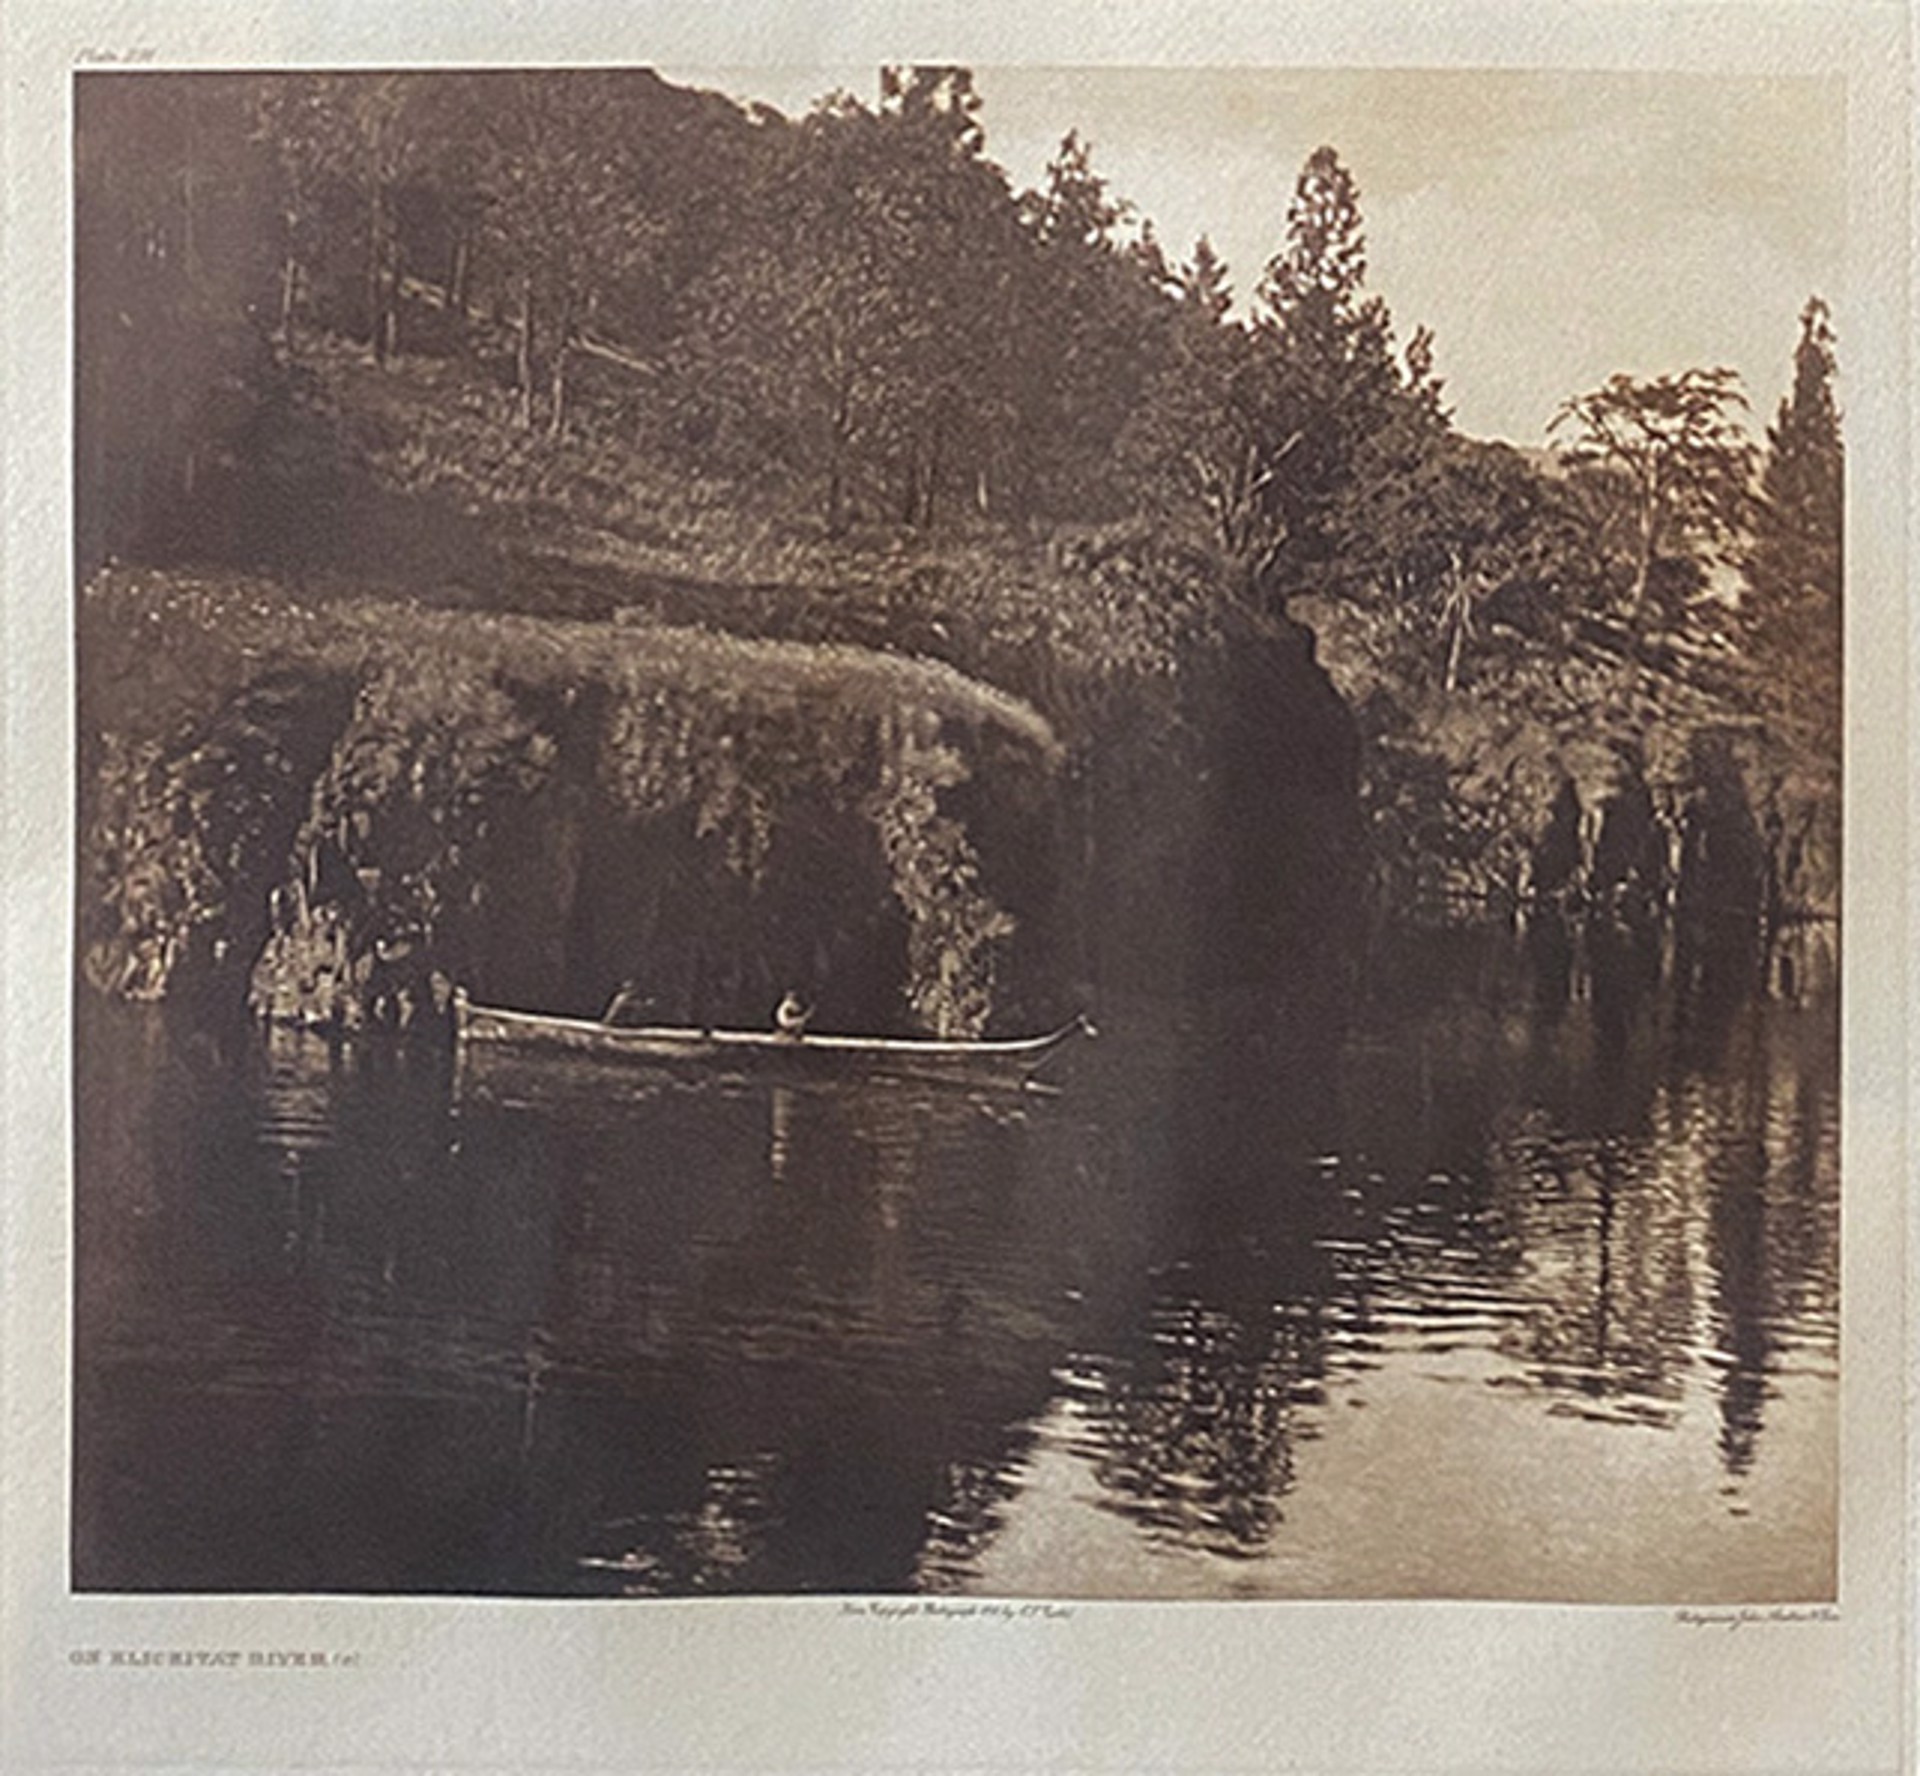 On Klickitat River, plate #291 by Edward S Curtis